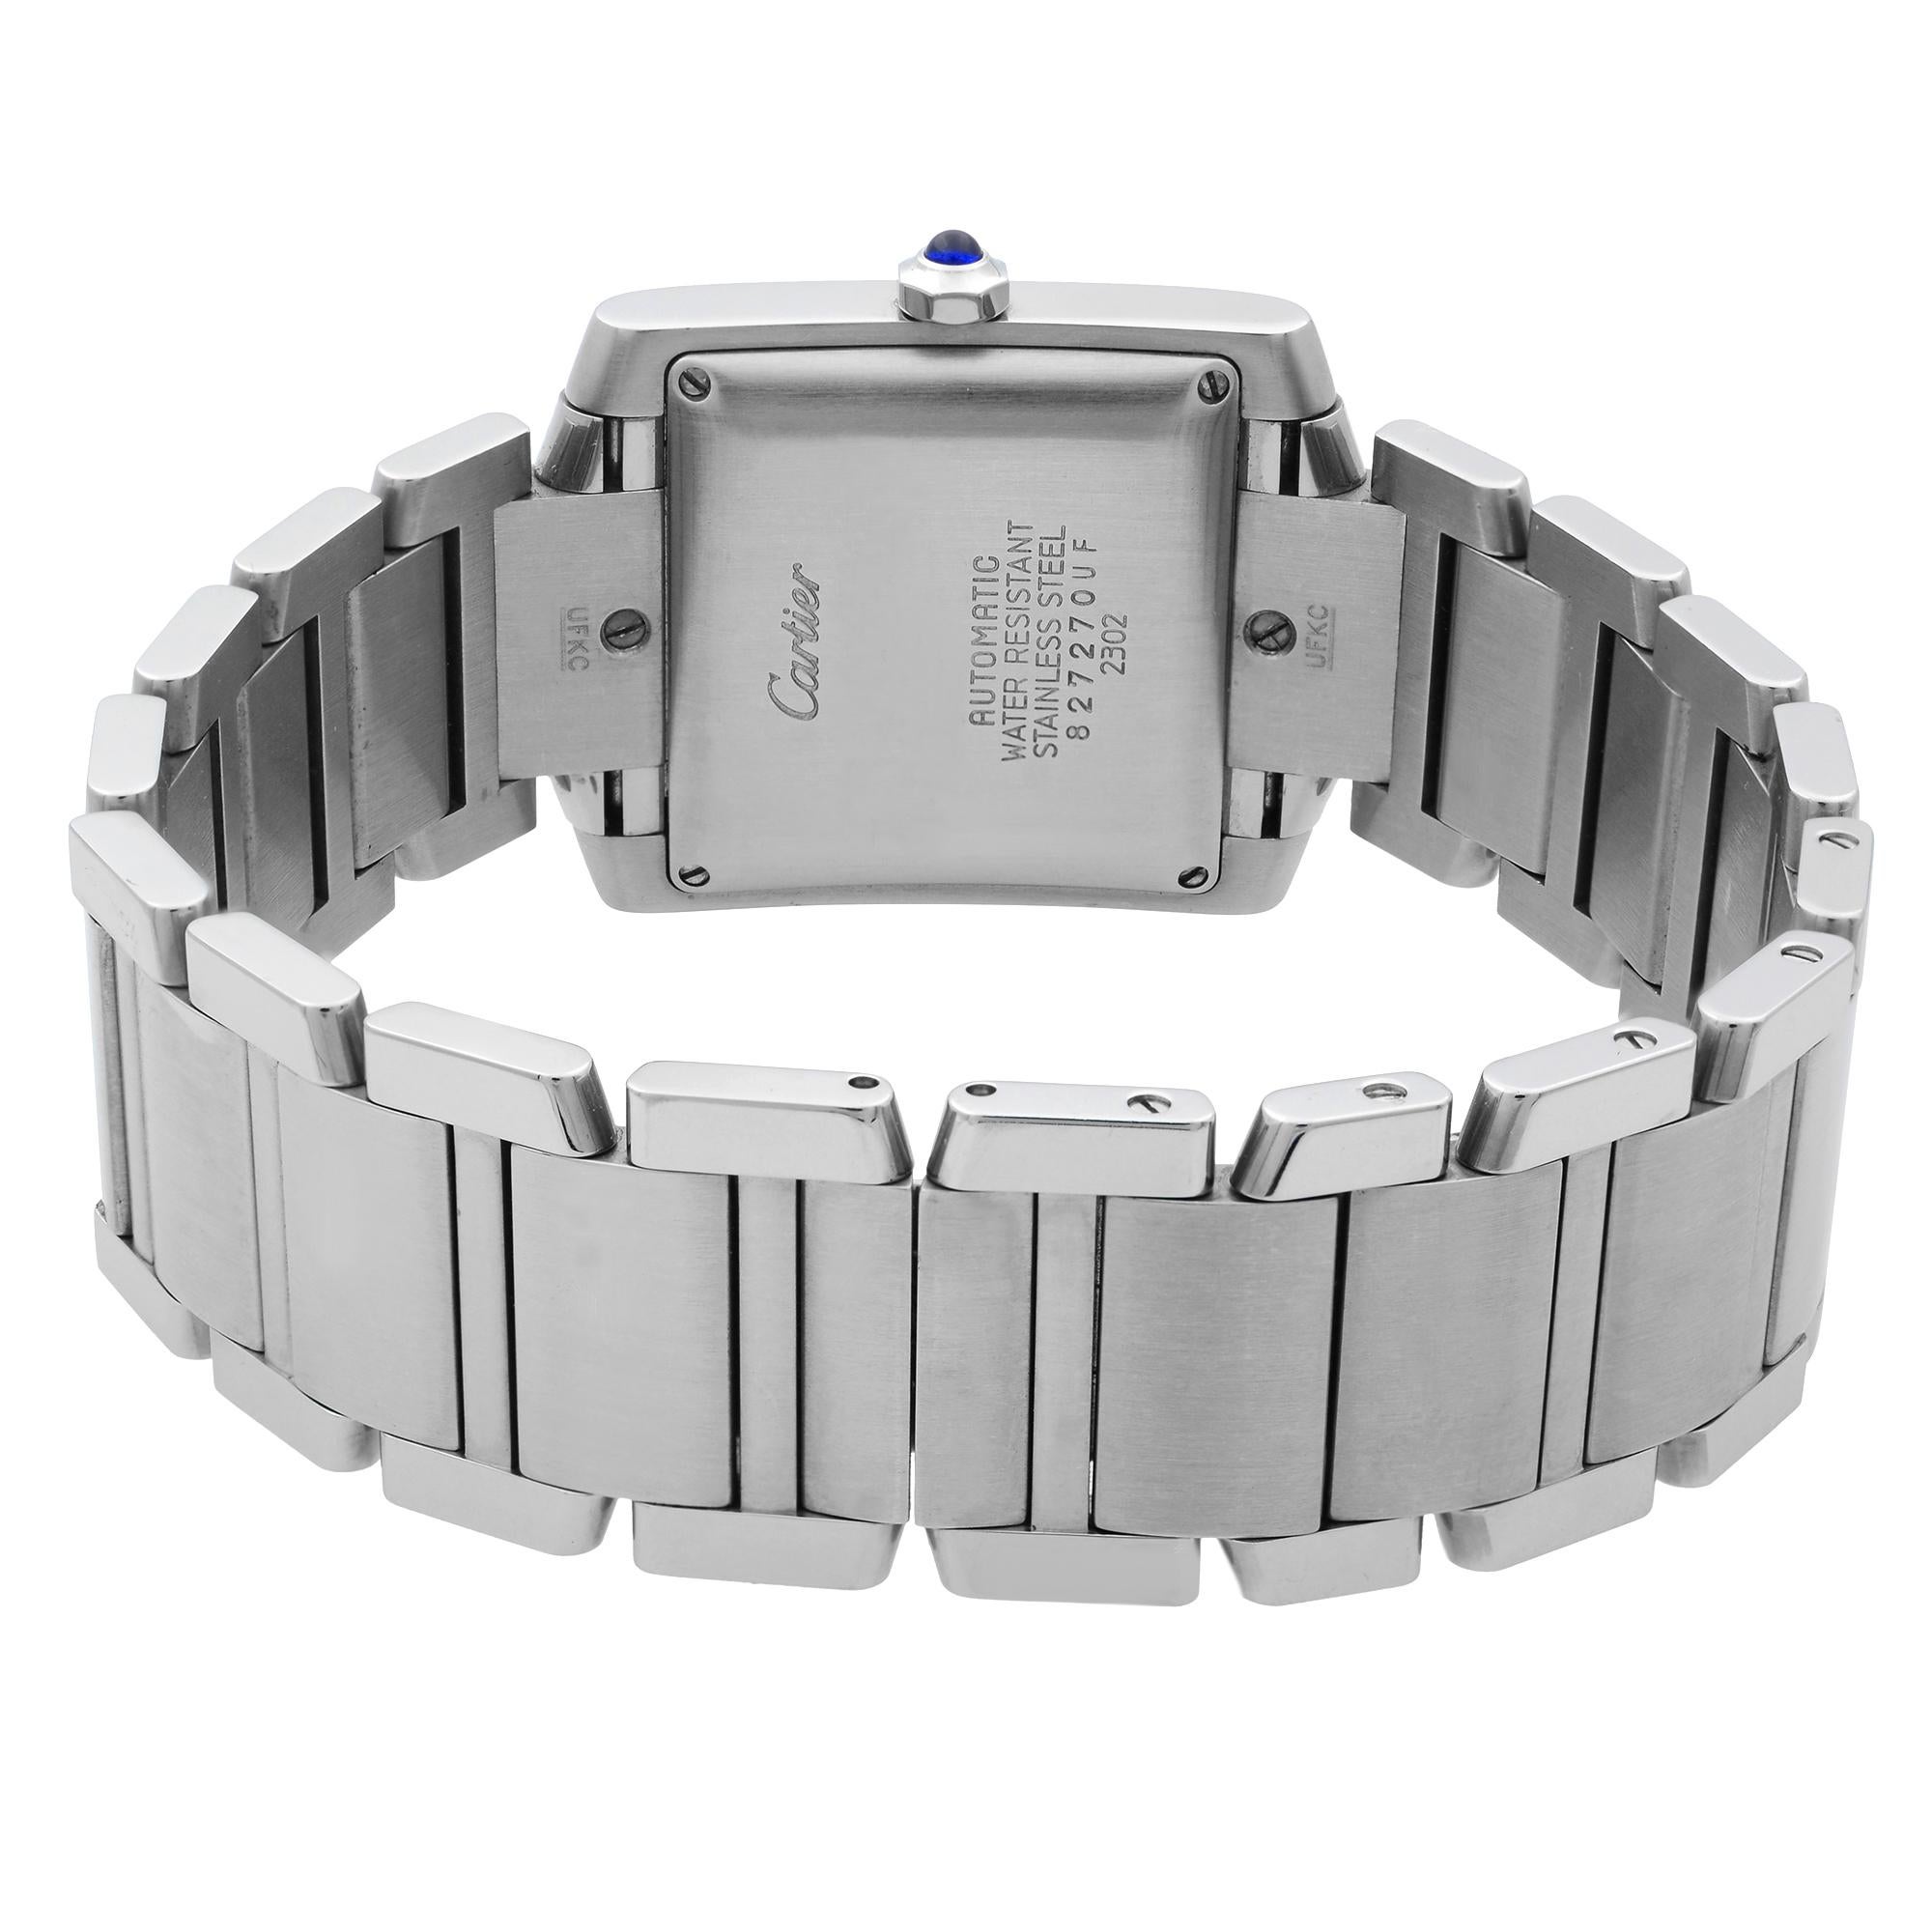 Cartier Tank Francaise 2302 Stainless Steel Silver Dial Men's Watch W51002Q3 3